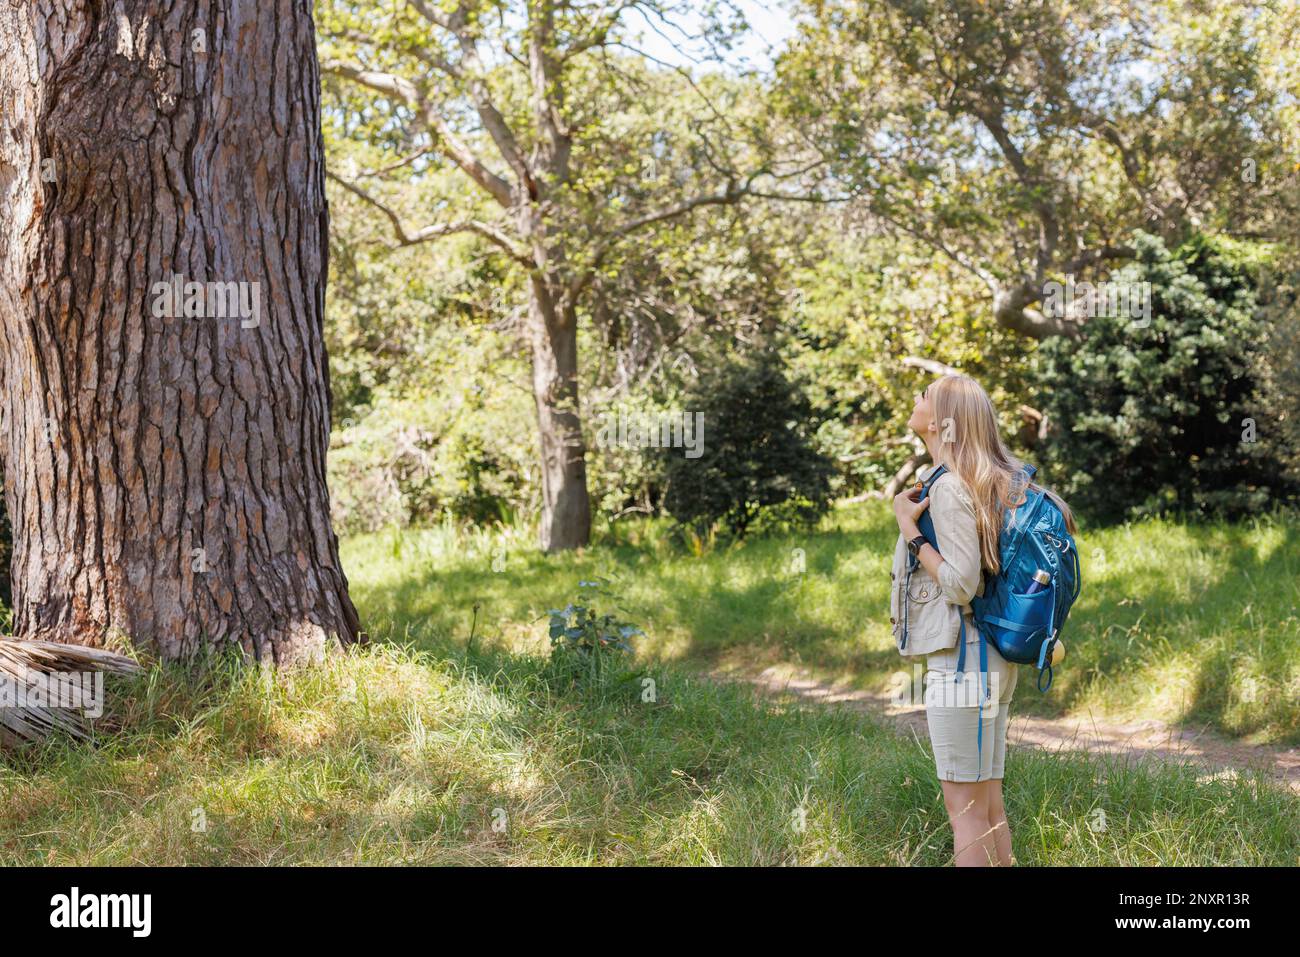 Caucasian woman with backpack looking up at enormous tree in sunny forest, copy space Stock Photo